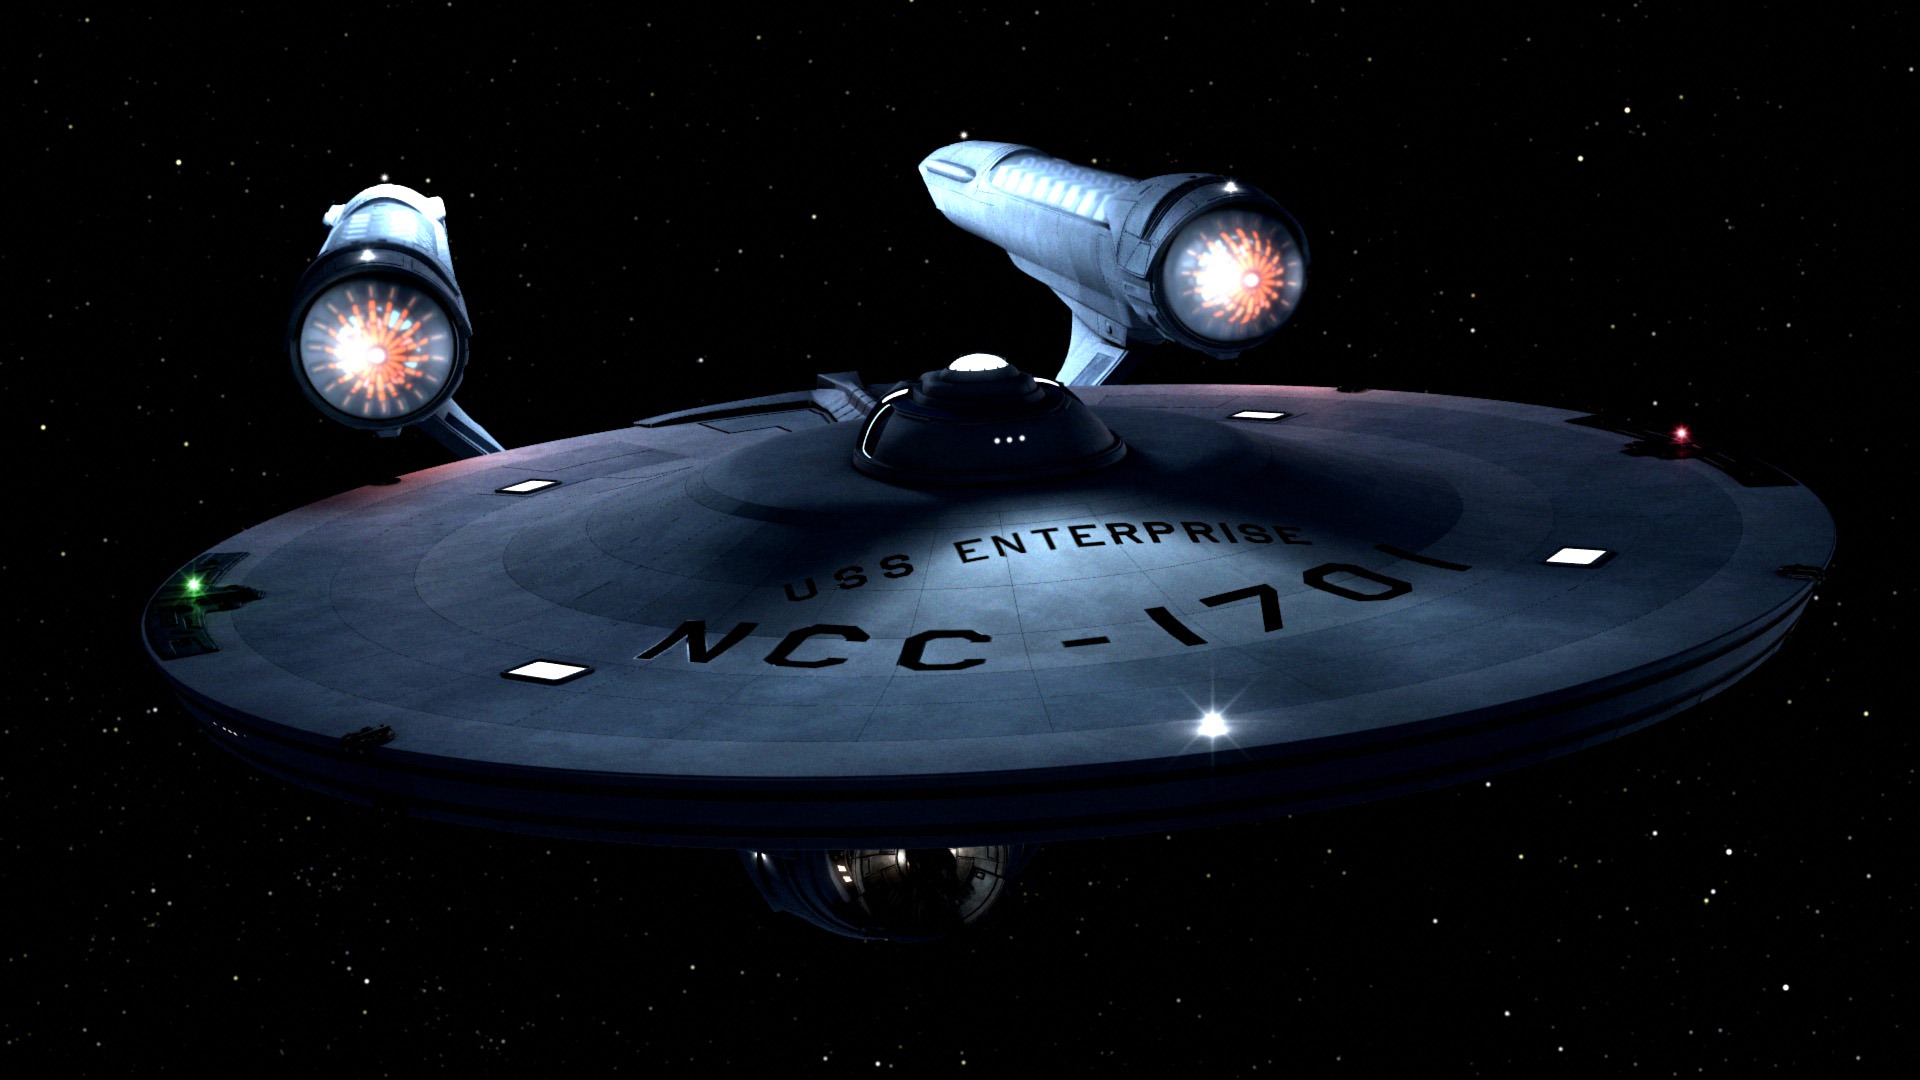 Just A Nice Image Of The Tos Enterprise Done In Cgi I Think See It